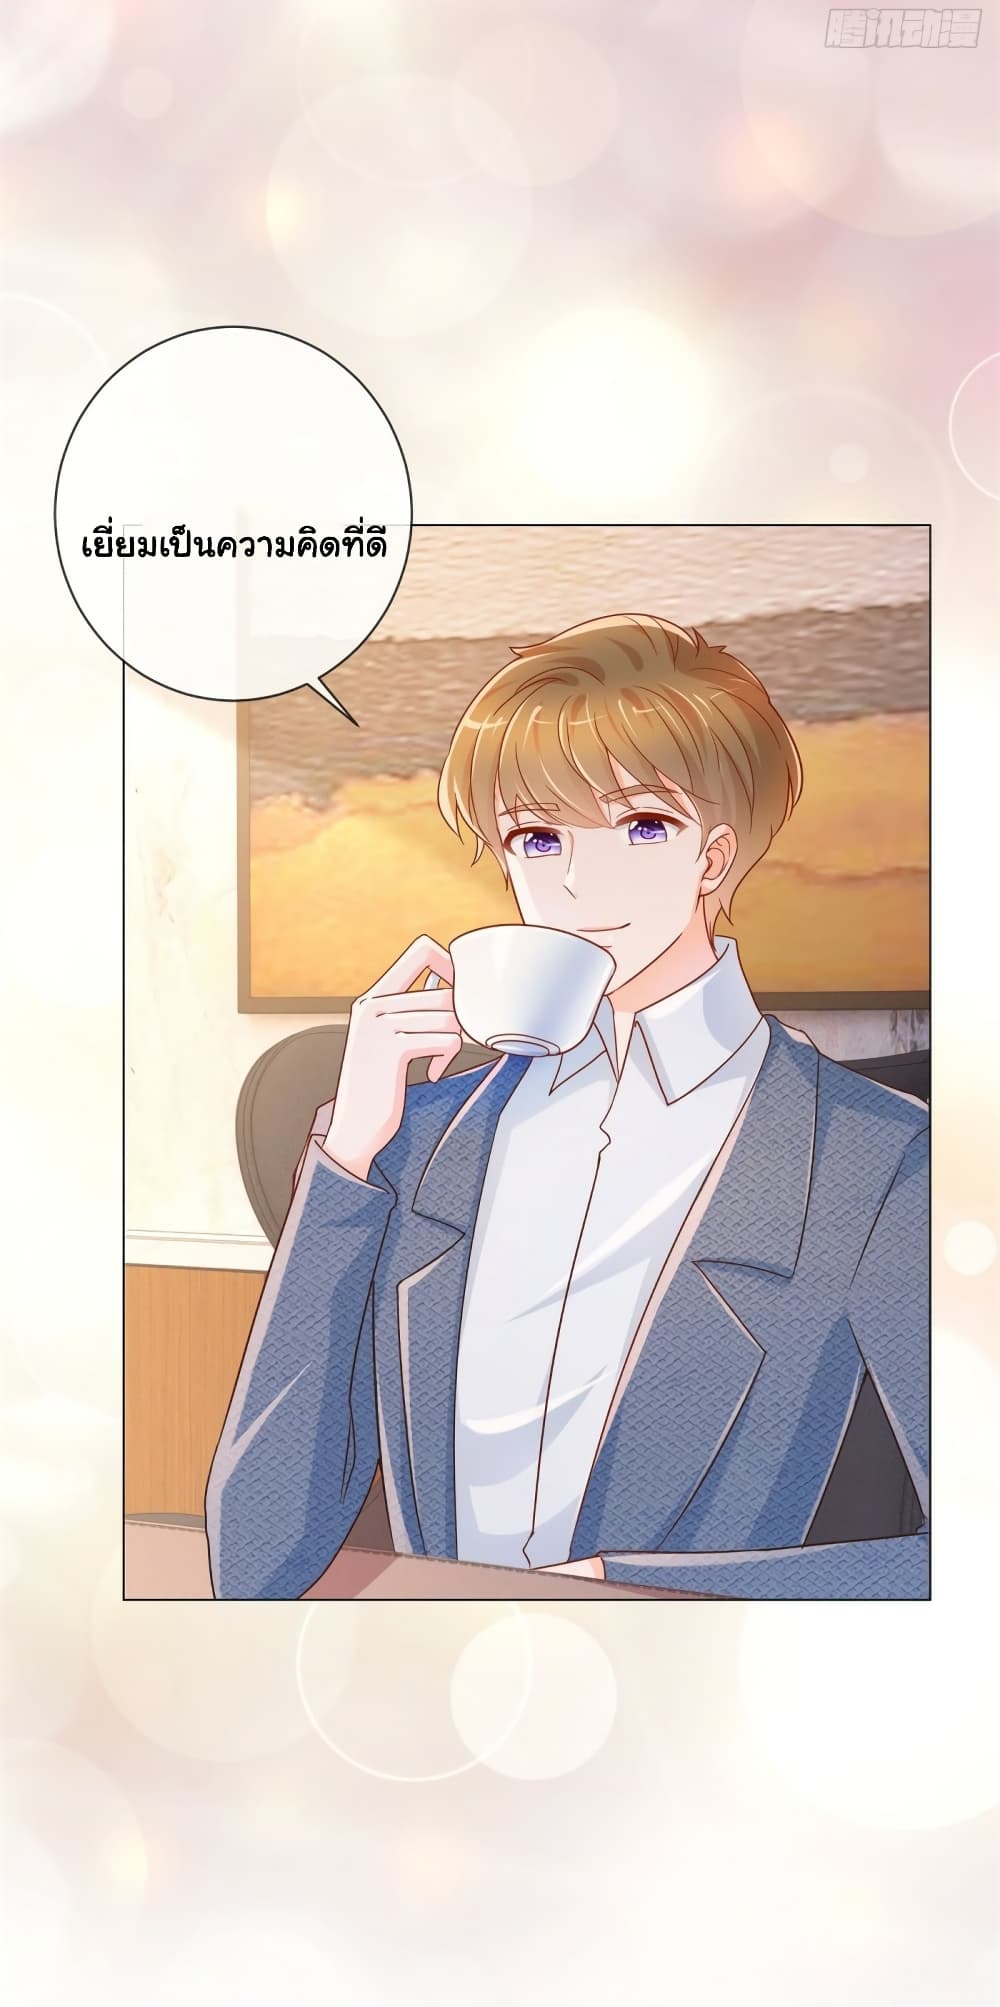 The Lovely Wife And Strange Marriage à¹à¸œà¸™à¸£à¸±à¸à¸¥à¸§à¸‡à¹ƒà¸ˆ 322 (19)